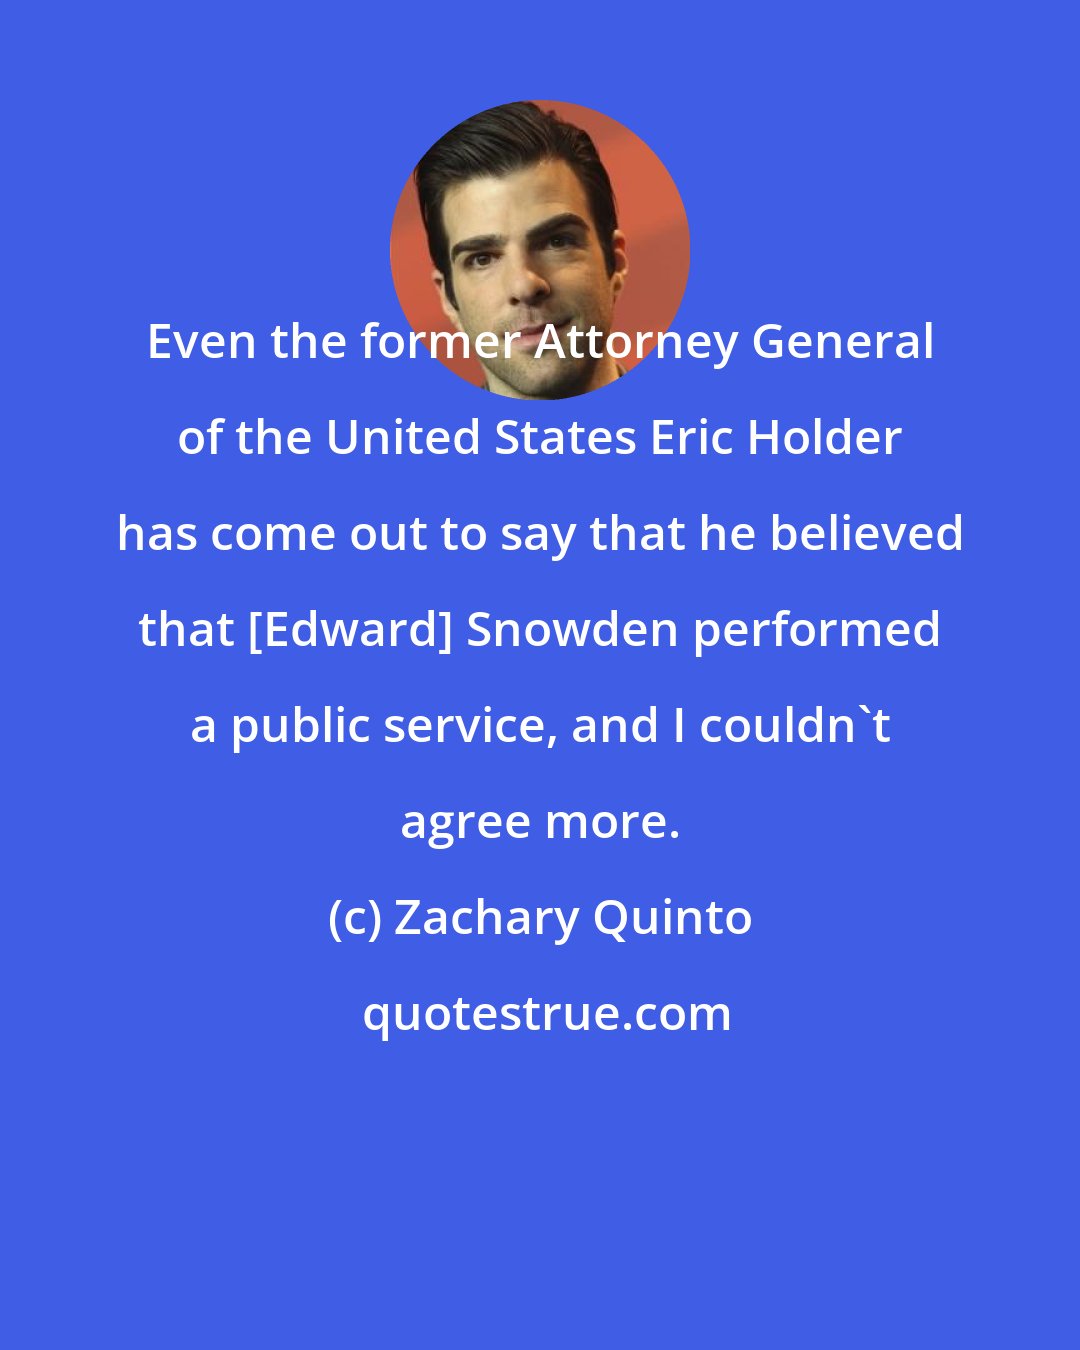 Zachary Quinto: Even the former Attorney General of the United States Eric Holder has come out to say that he believed that [Edward] Snowden performed a public service, and I couldn't agree more.